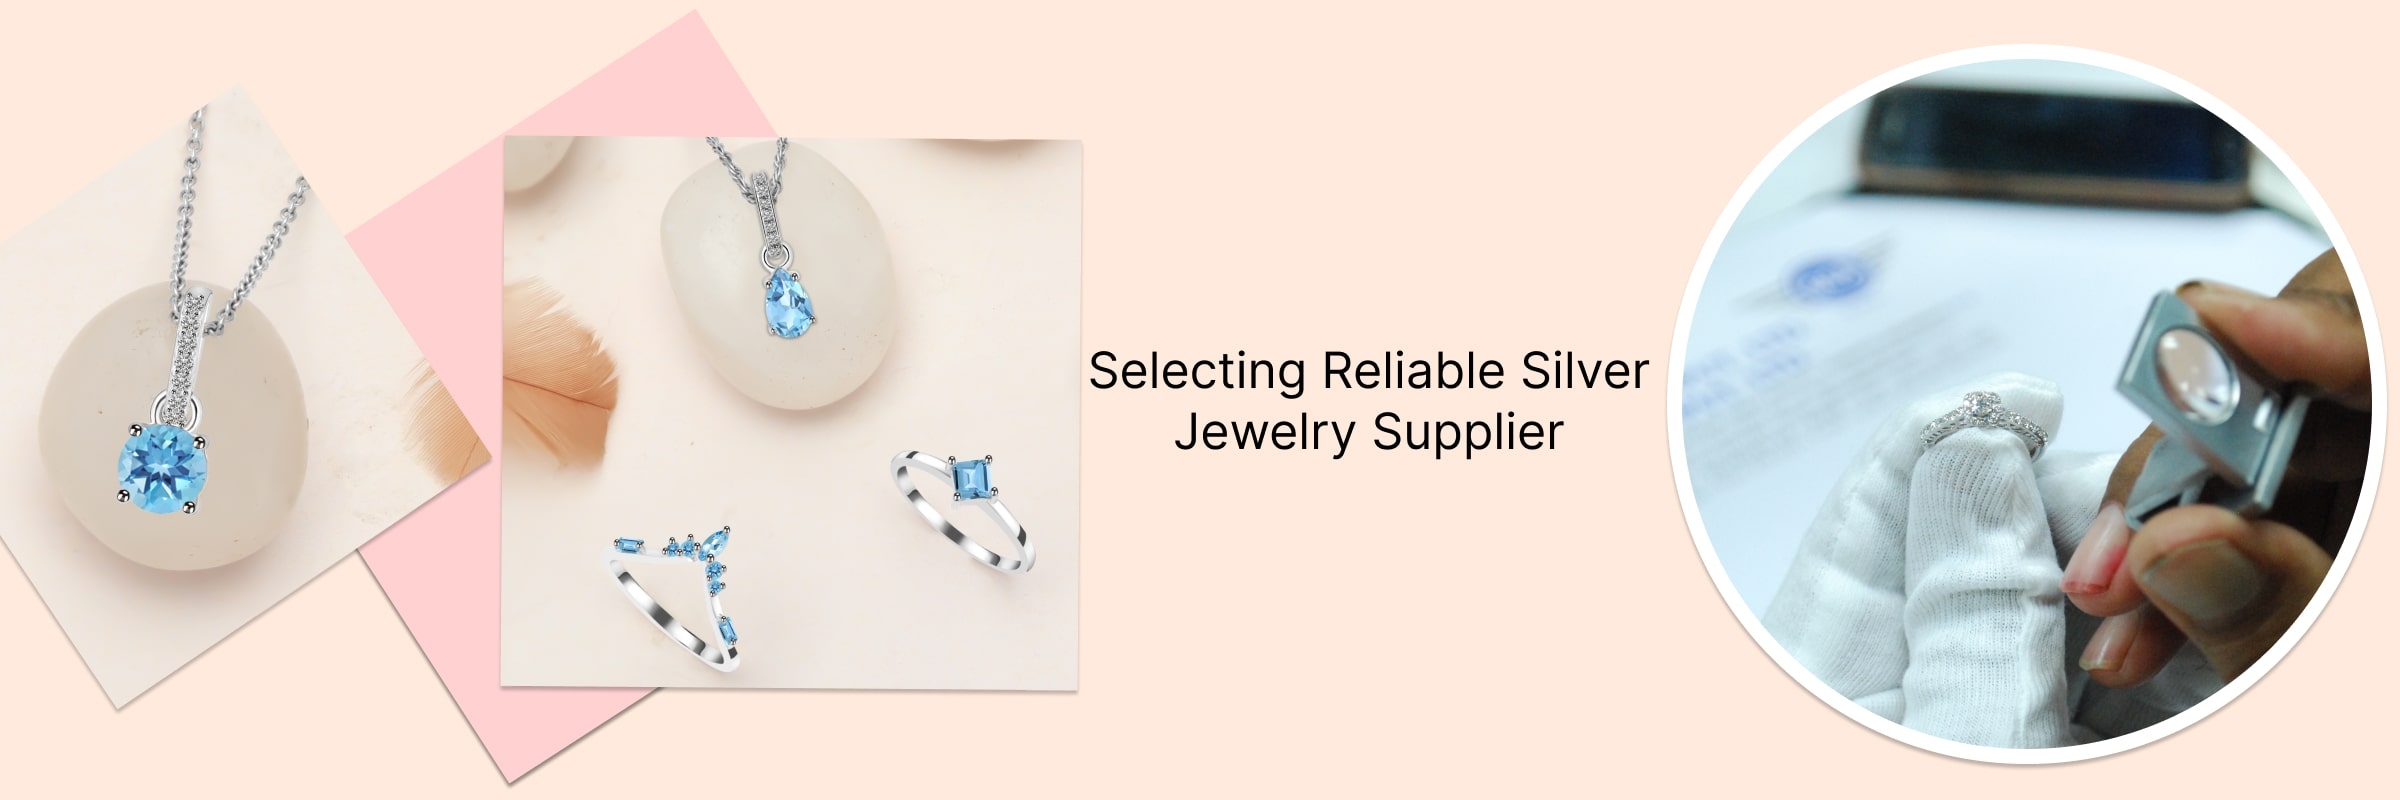 How To Select A Quality Wholesale Supplier for Your Silver Jewelry Business?